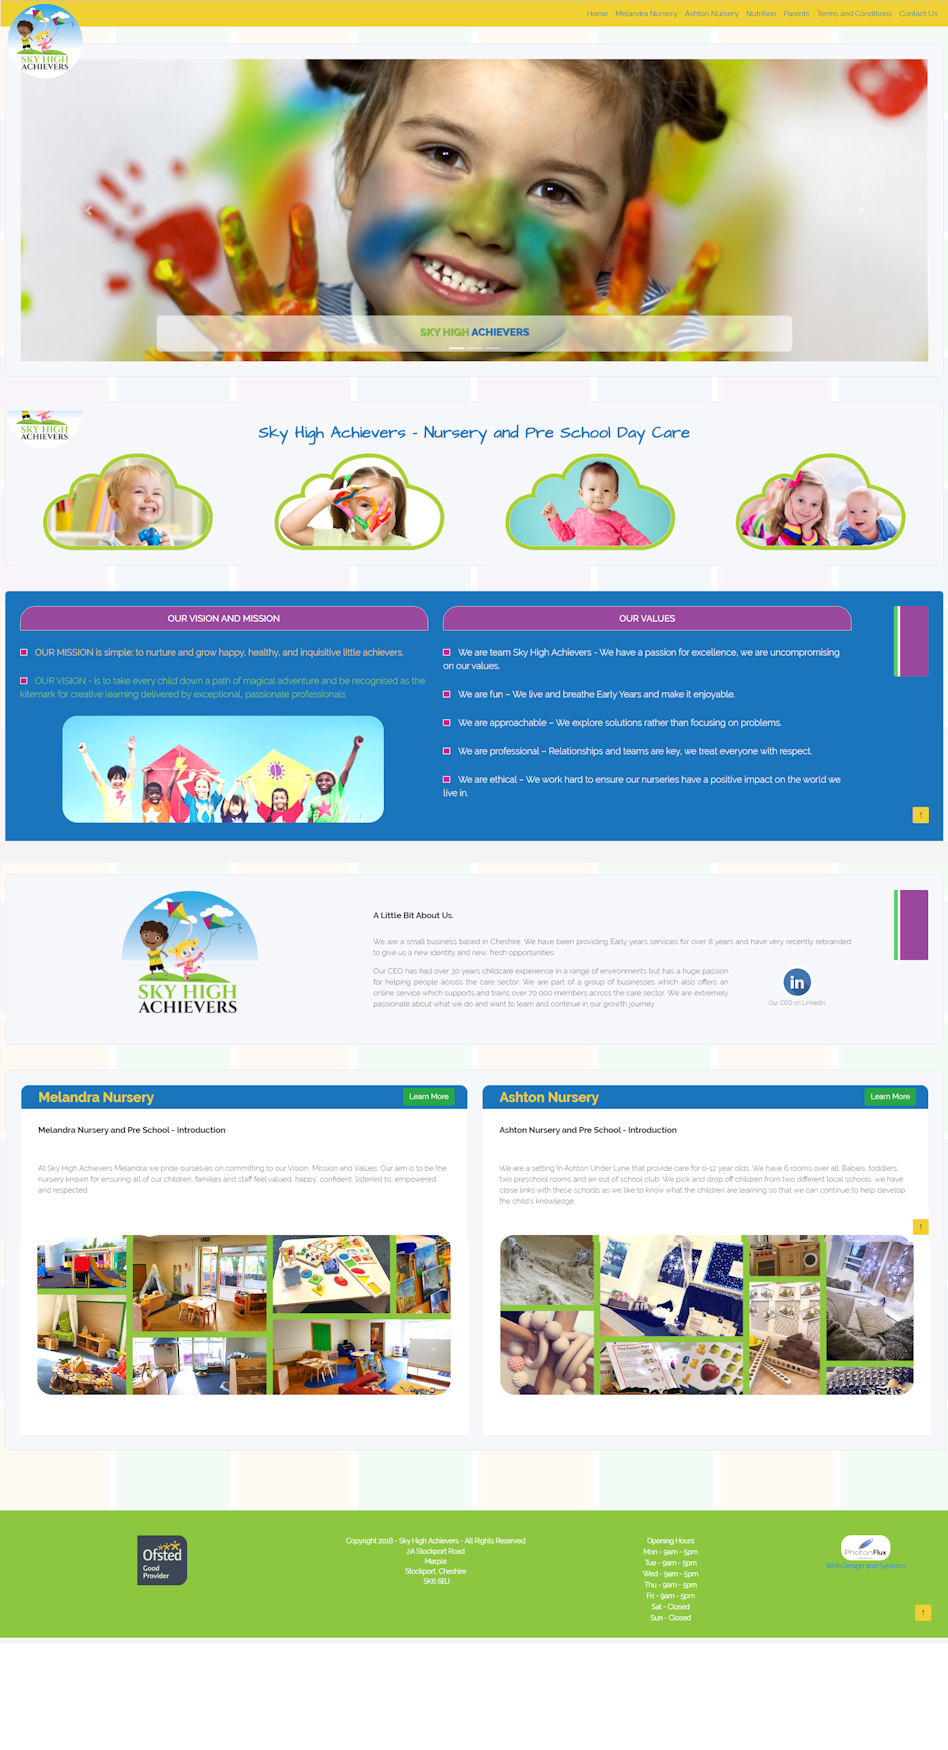 Previous work for a daycare centre.